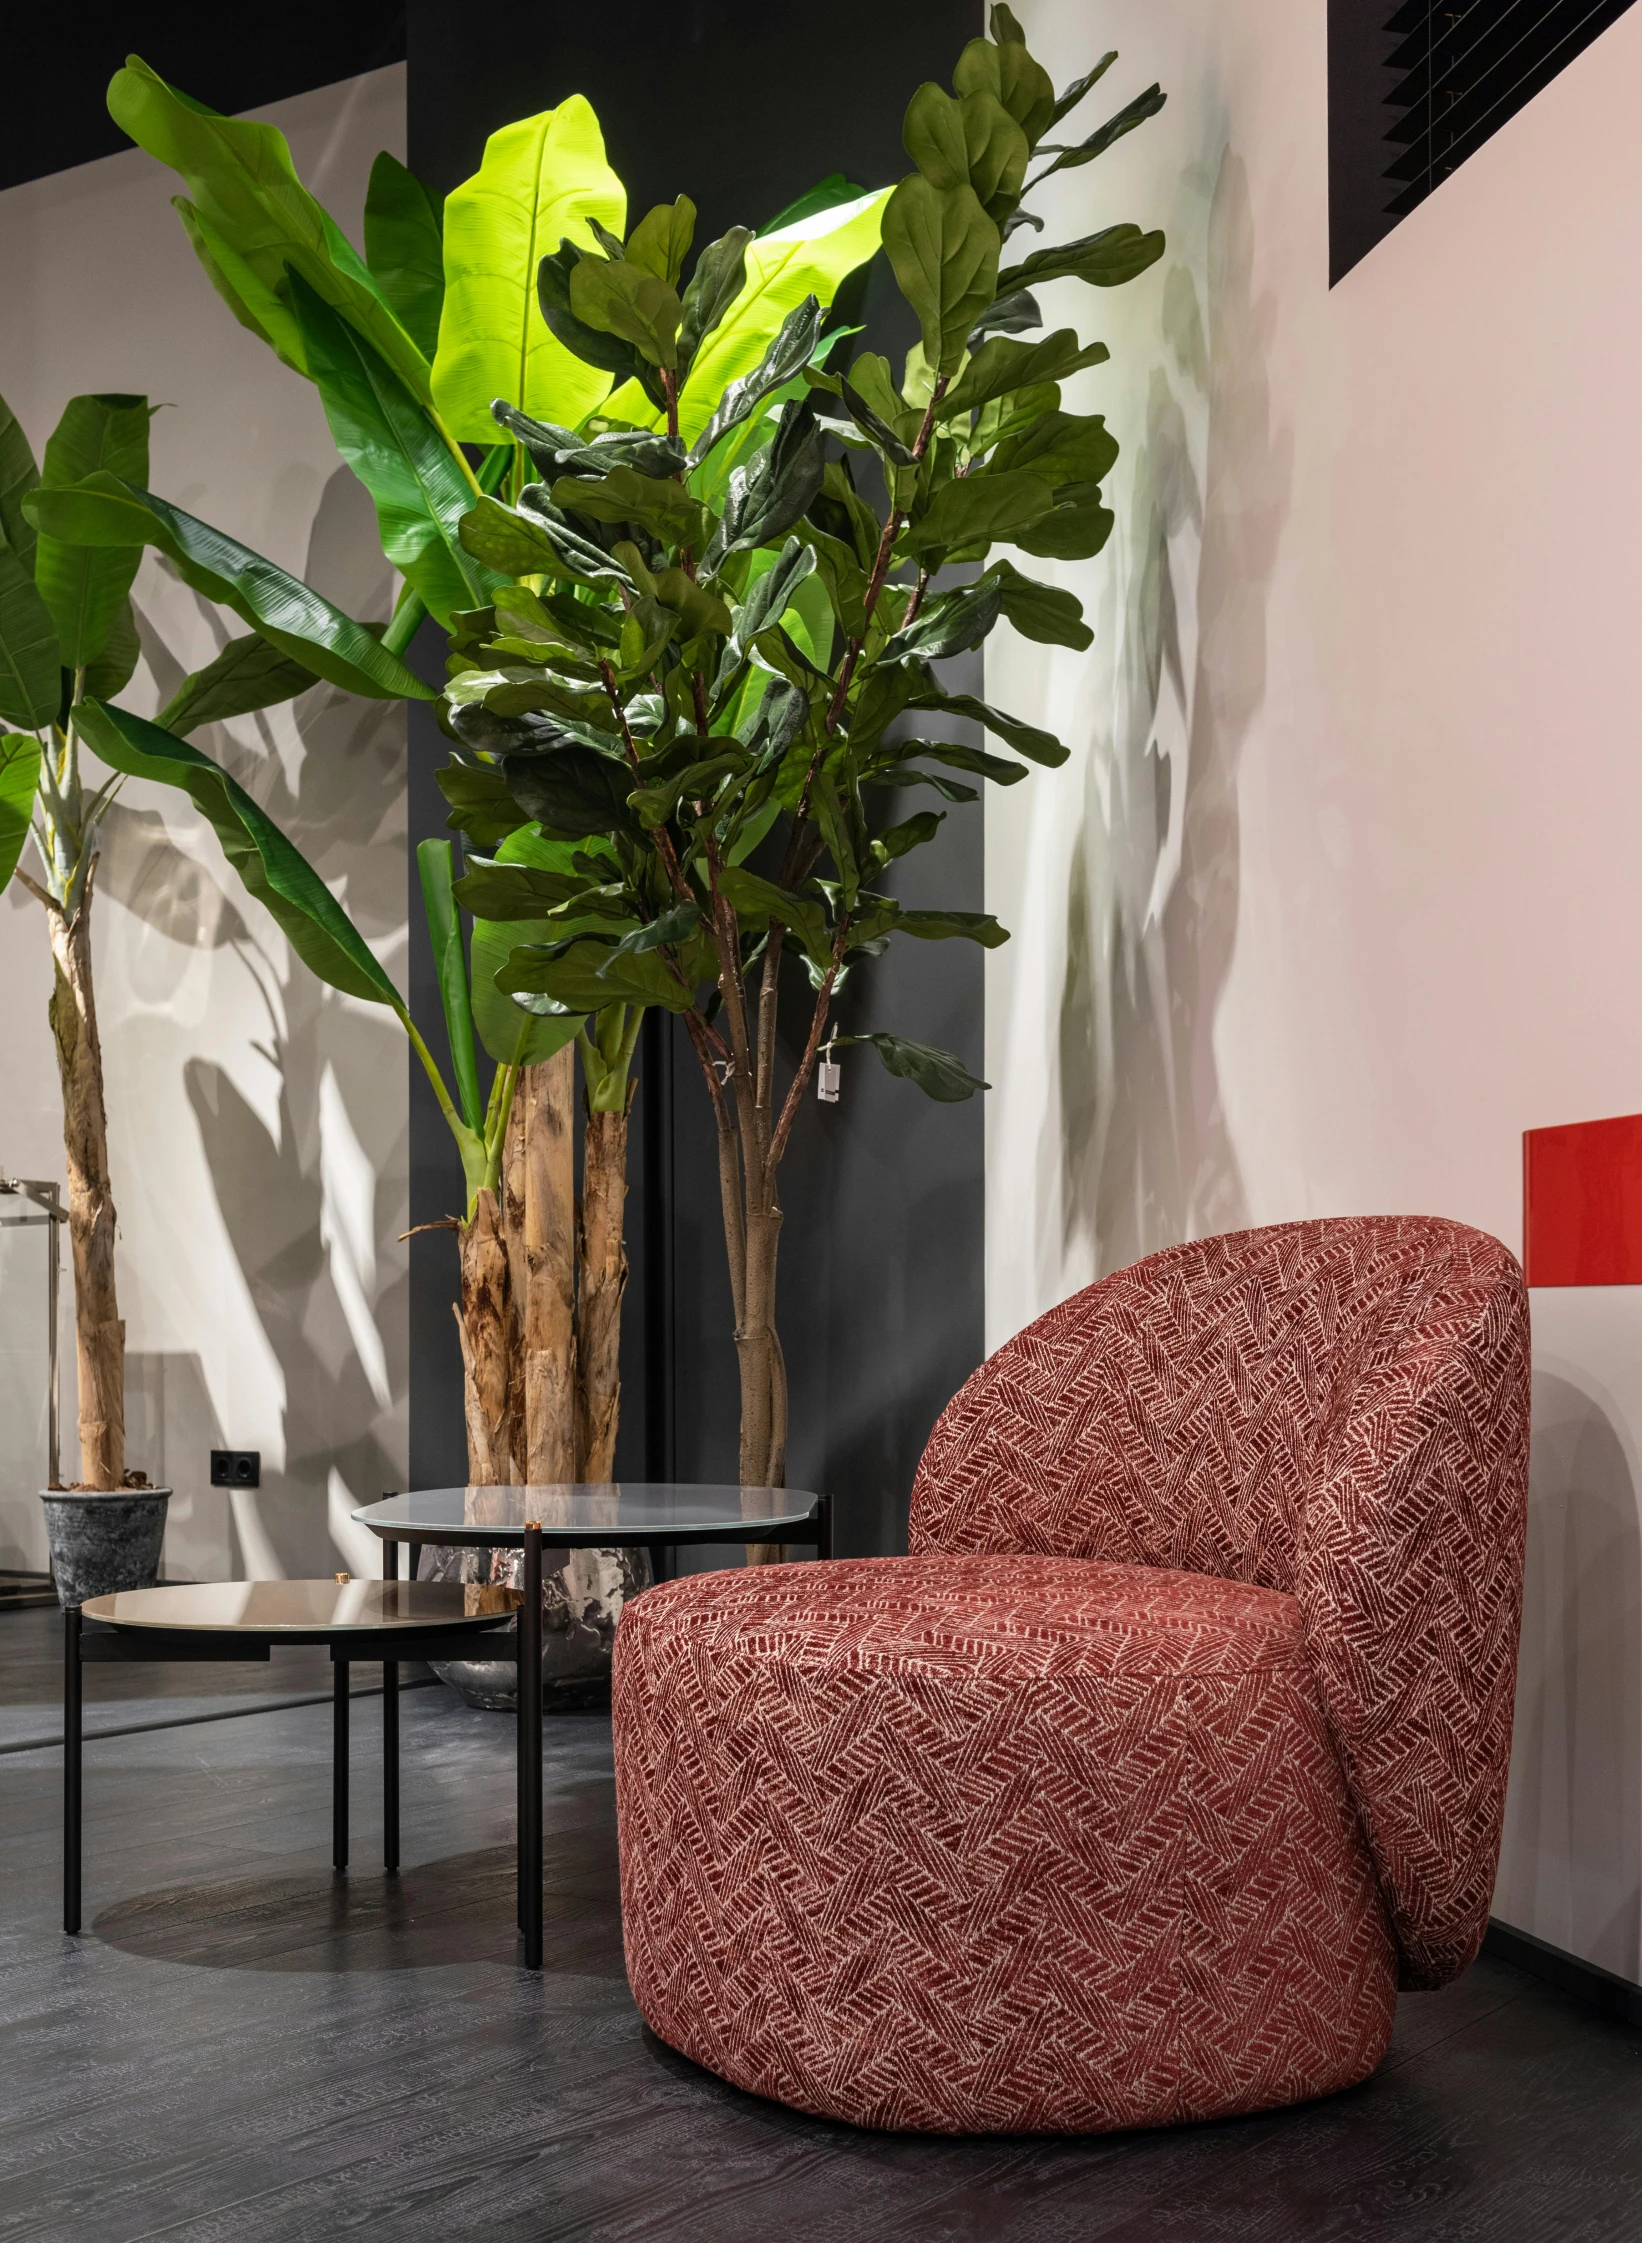 a red chair sitting in a living room next to a potted plant, inspired by Jan Wijnants, dezeen showroom, thumbnail, cityscape, high textured